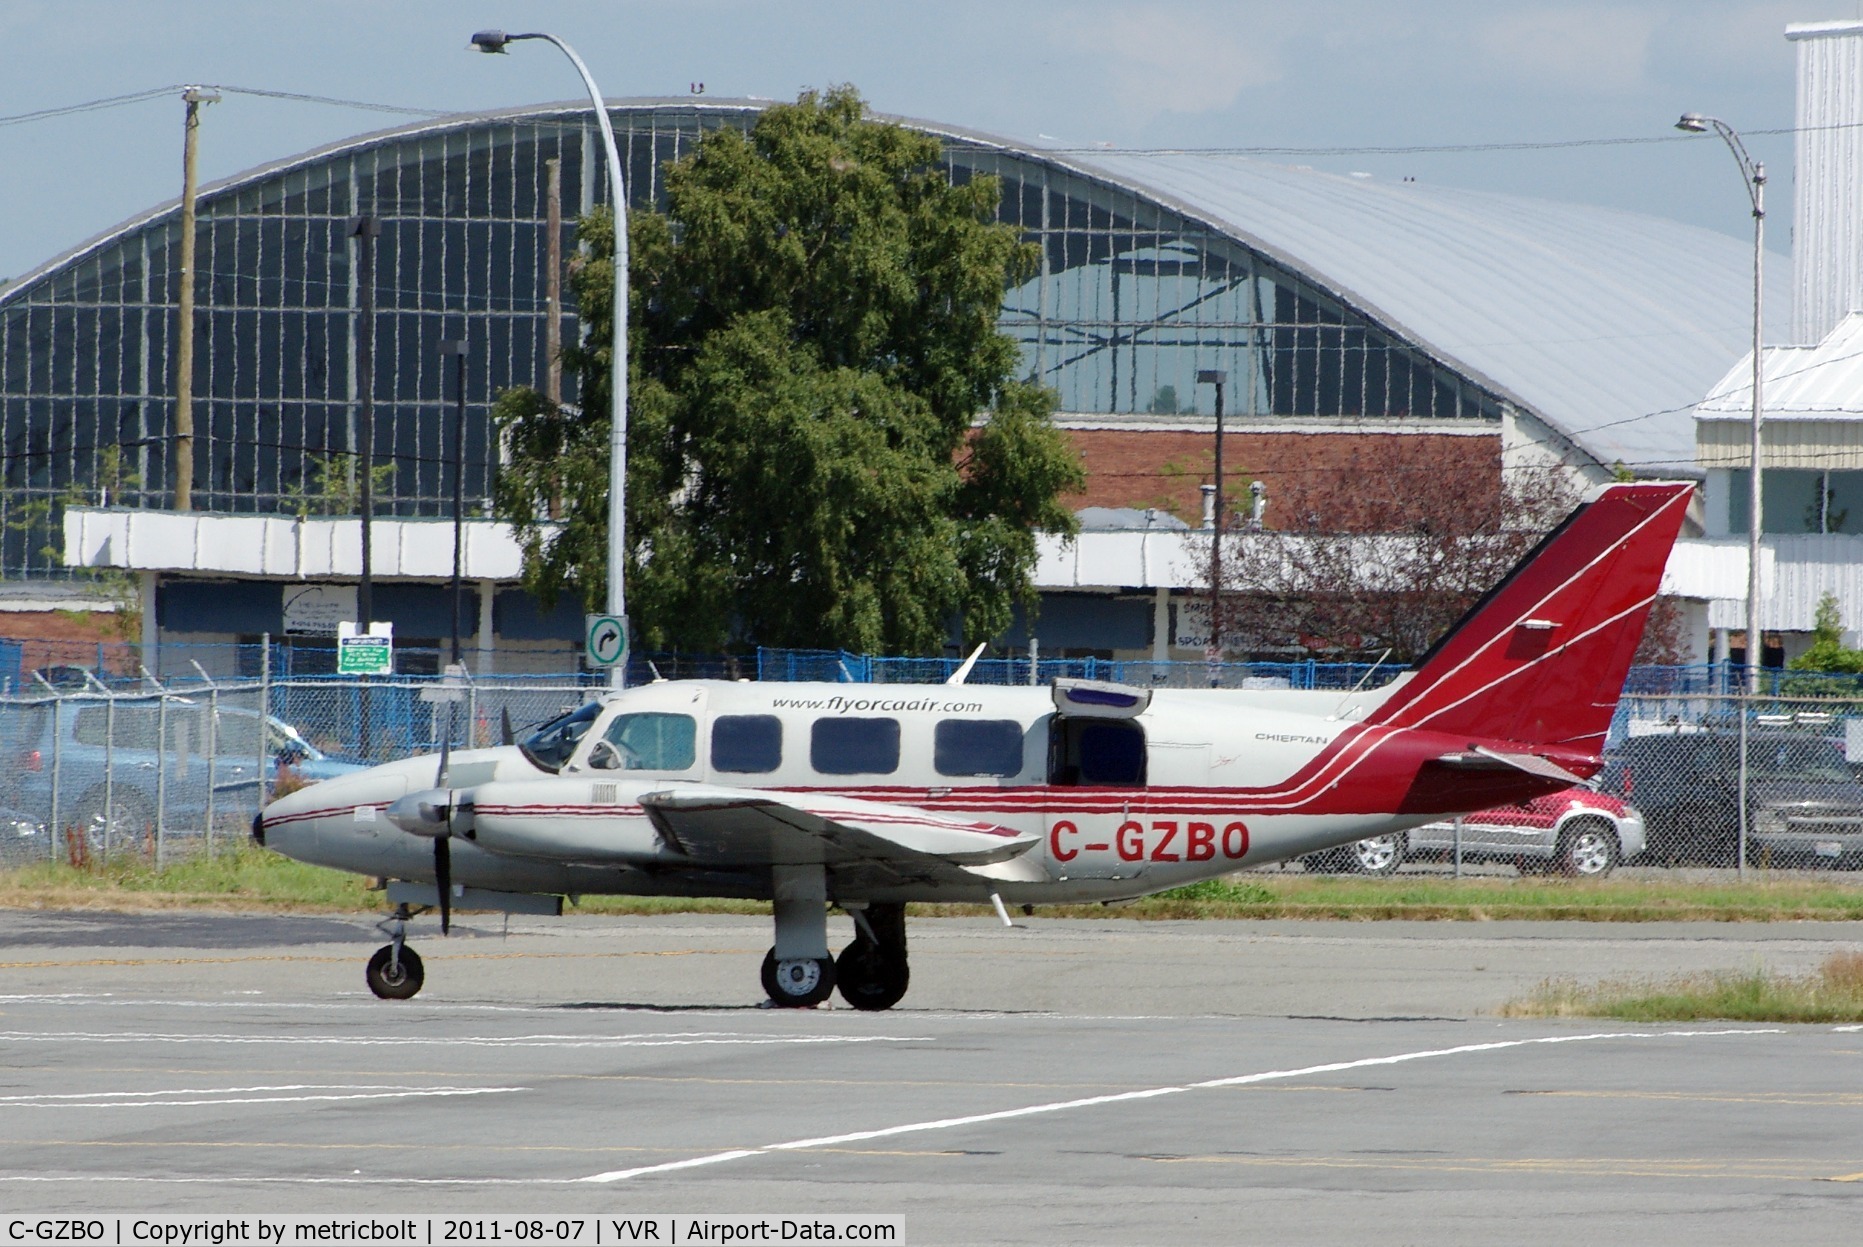 C-GZBO, Piper PA-31-350 Chieftain C/N 31-8252048, Now without titles on tail